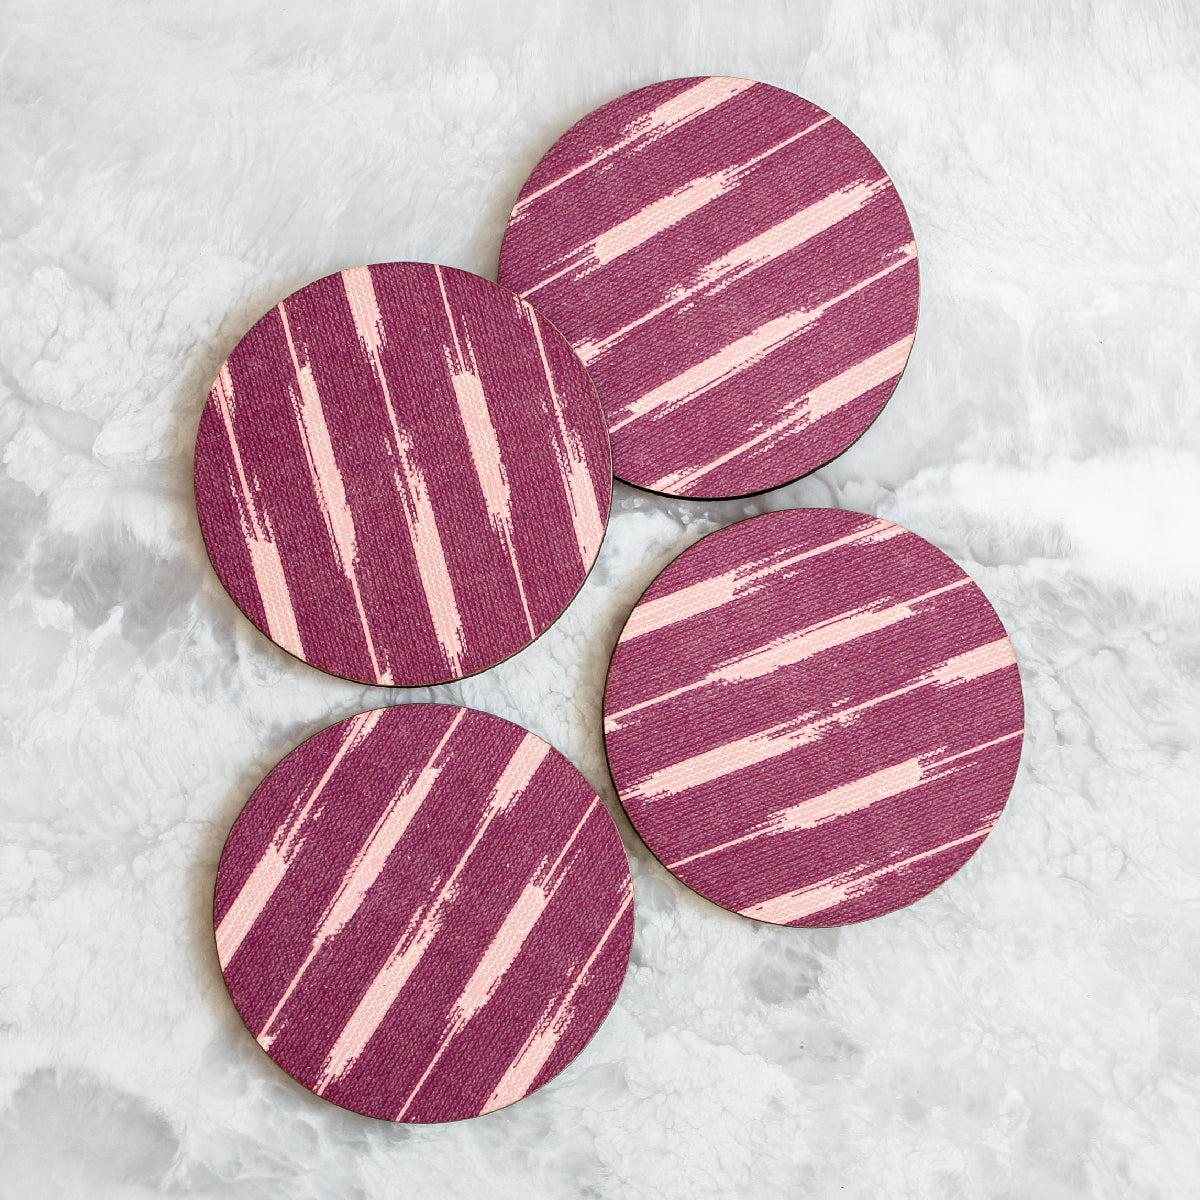 Ikat coasters made of cork and wood in purple by Tisch New York